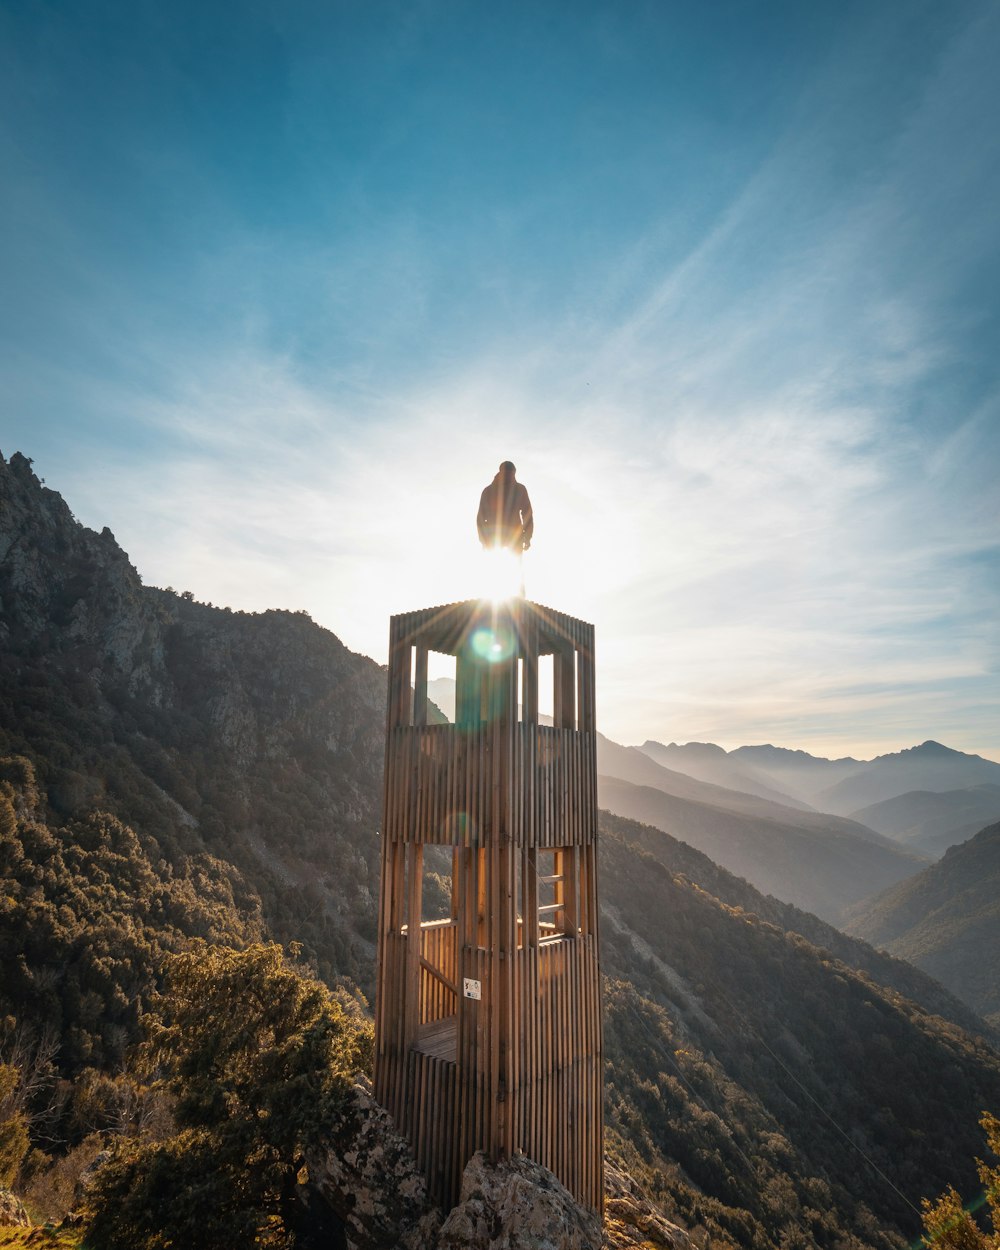 brown wooden tower on mountain during daytime